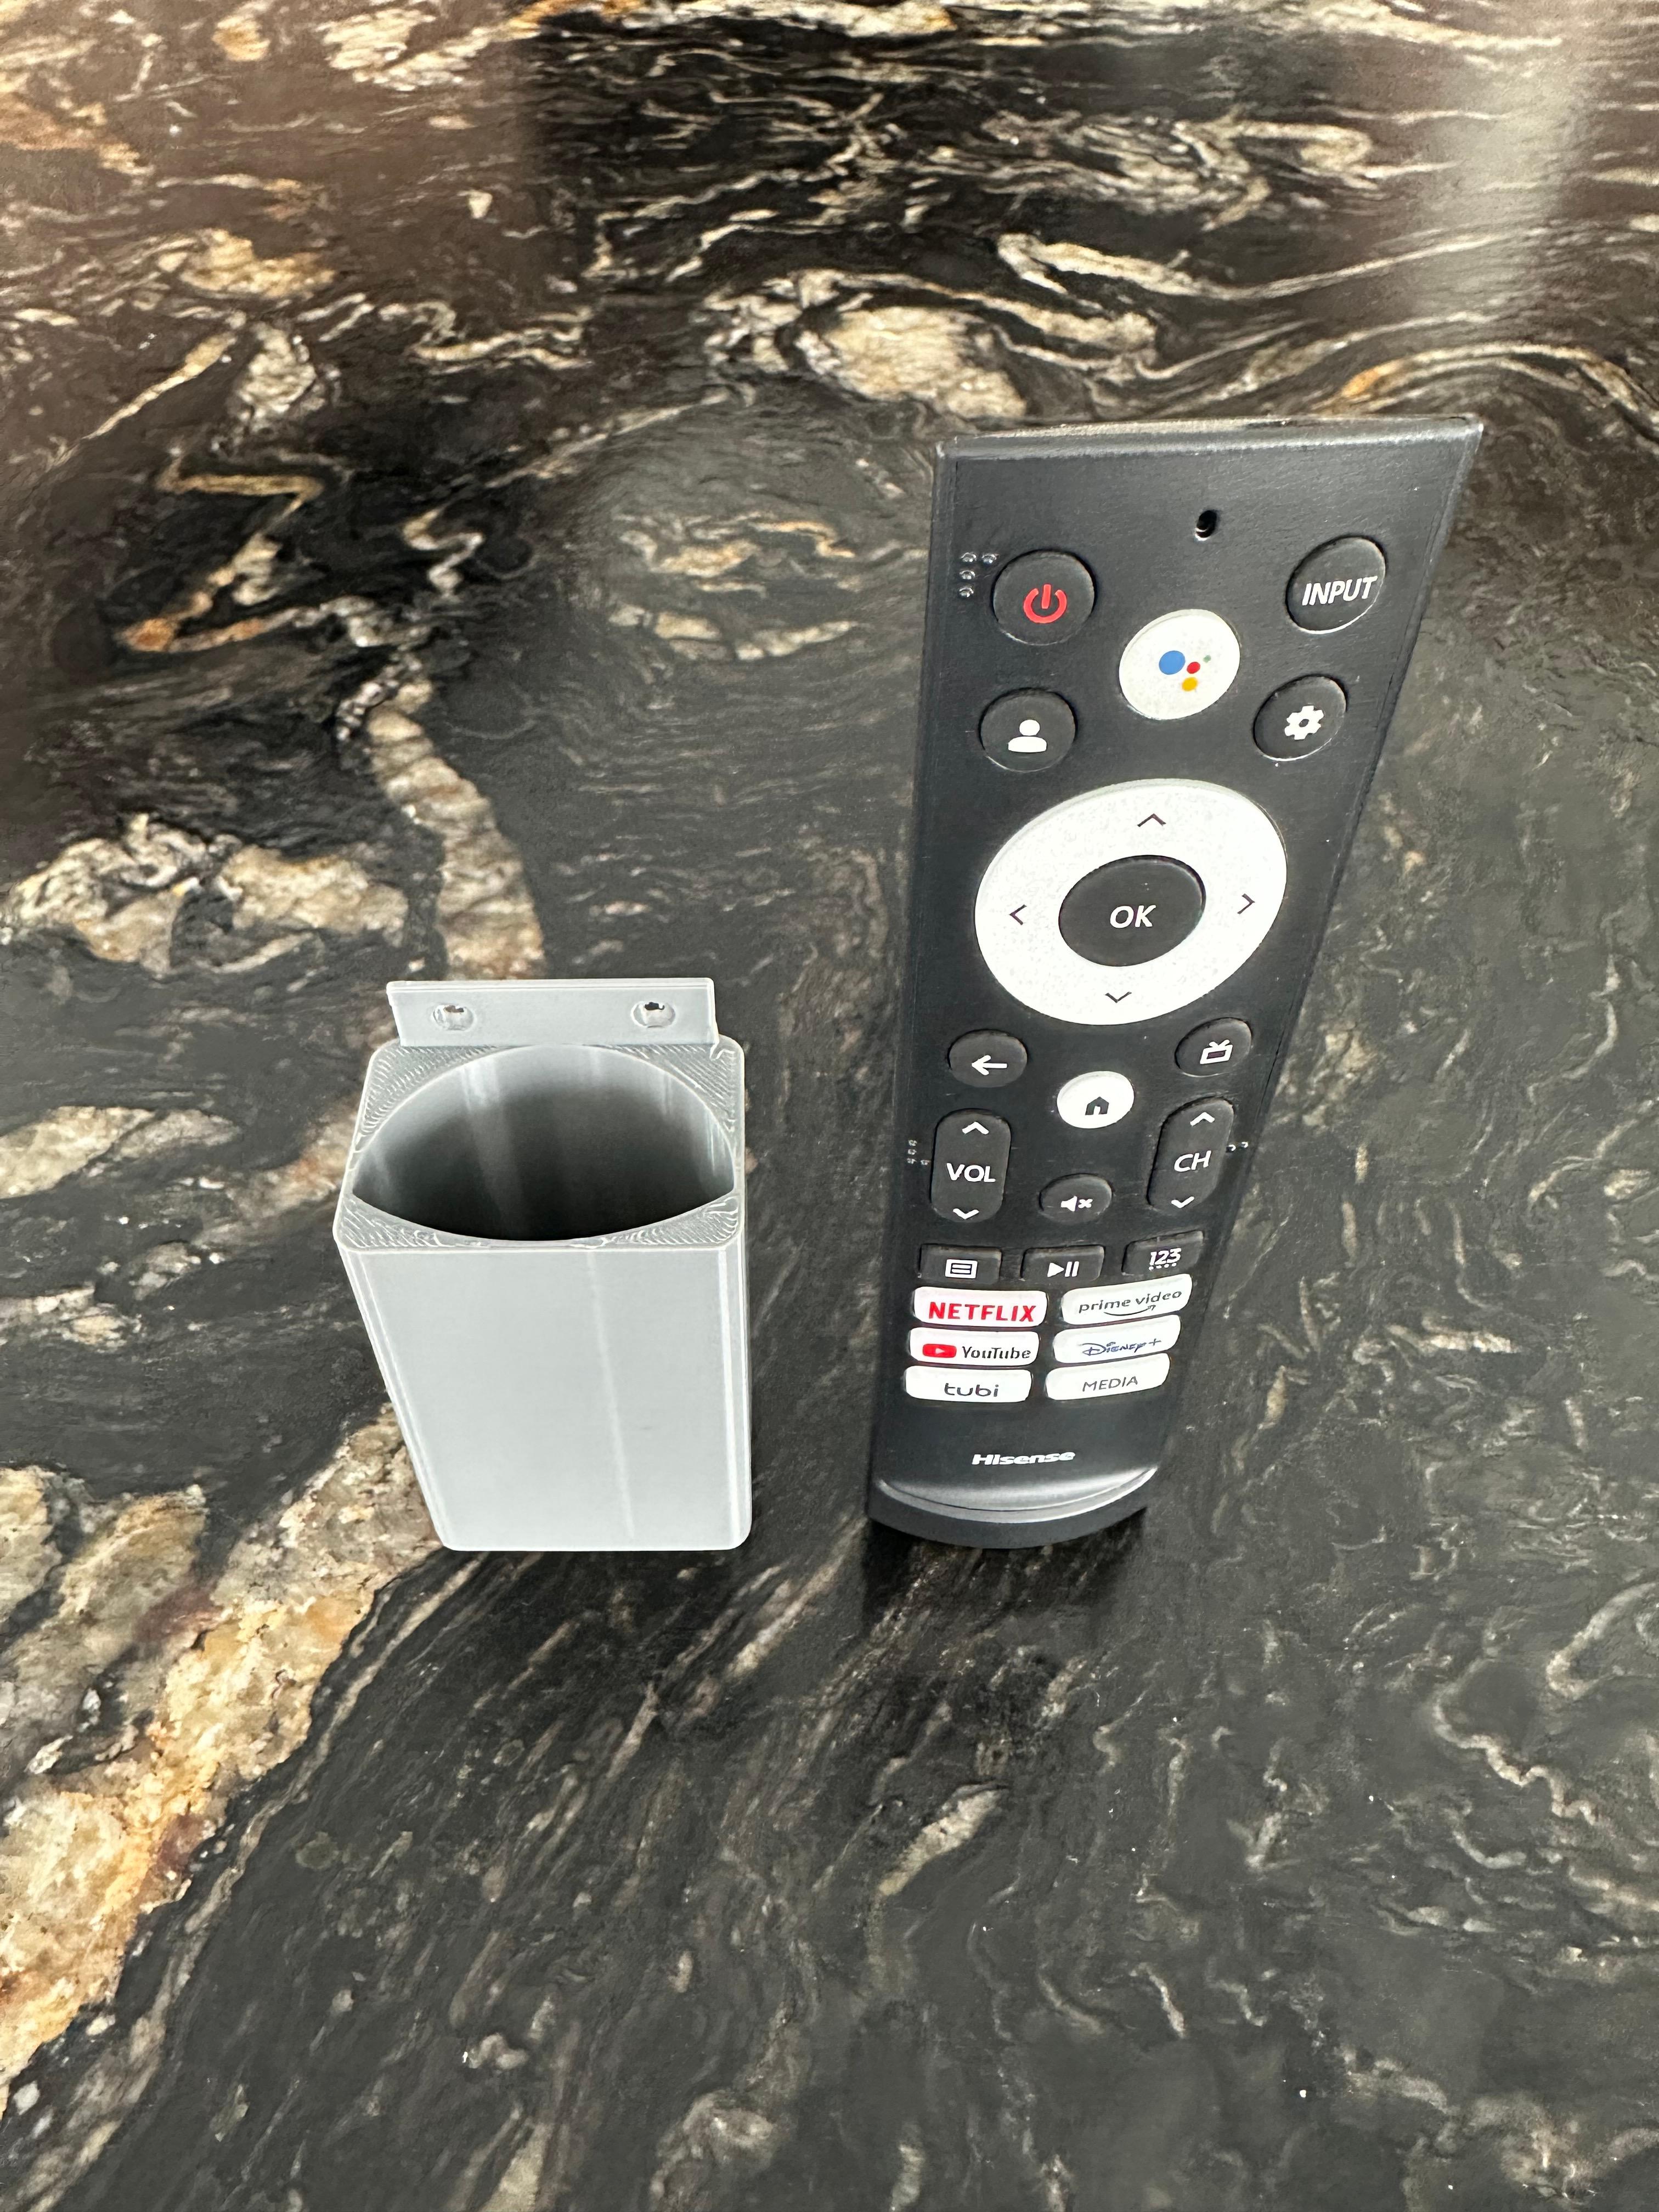 Wall mount for Hisense TV remote 3d model